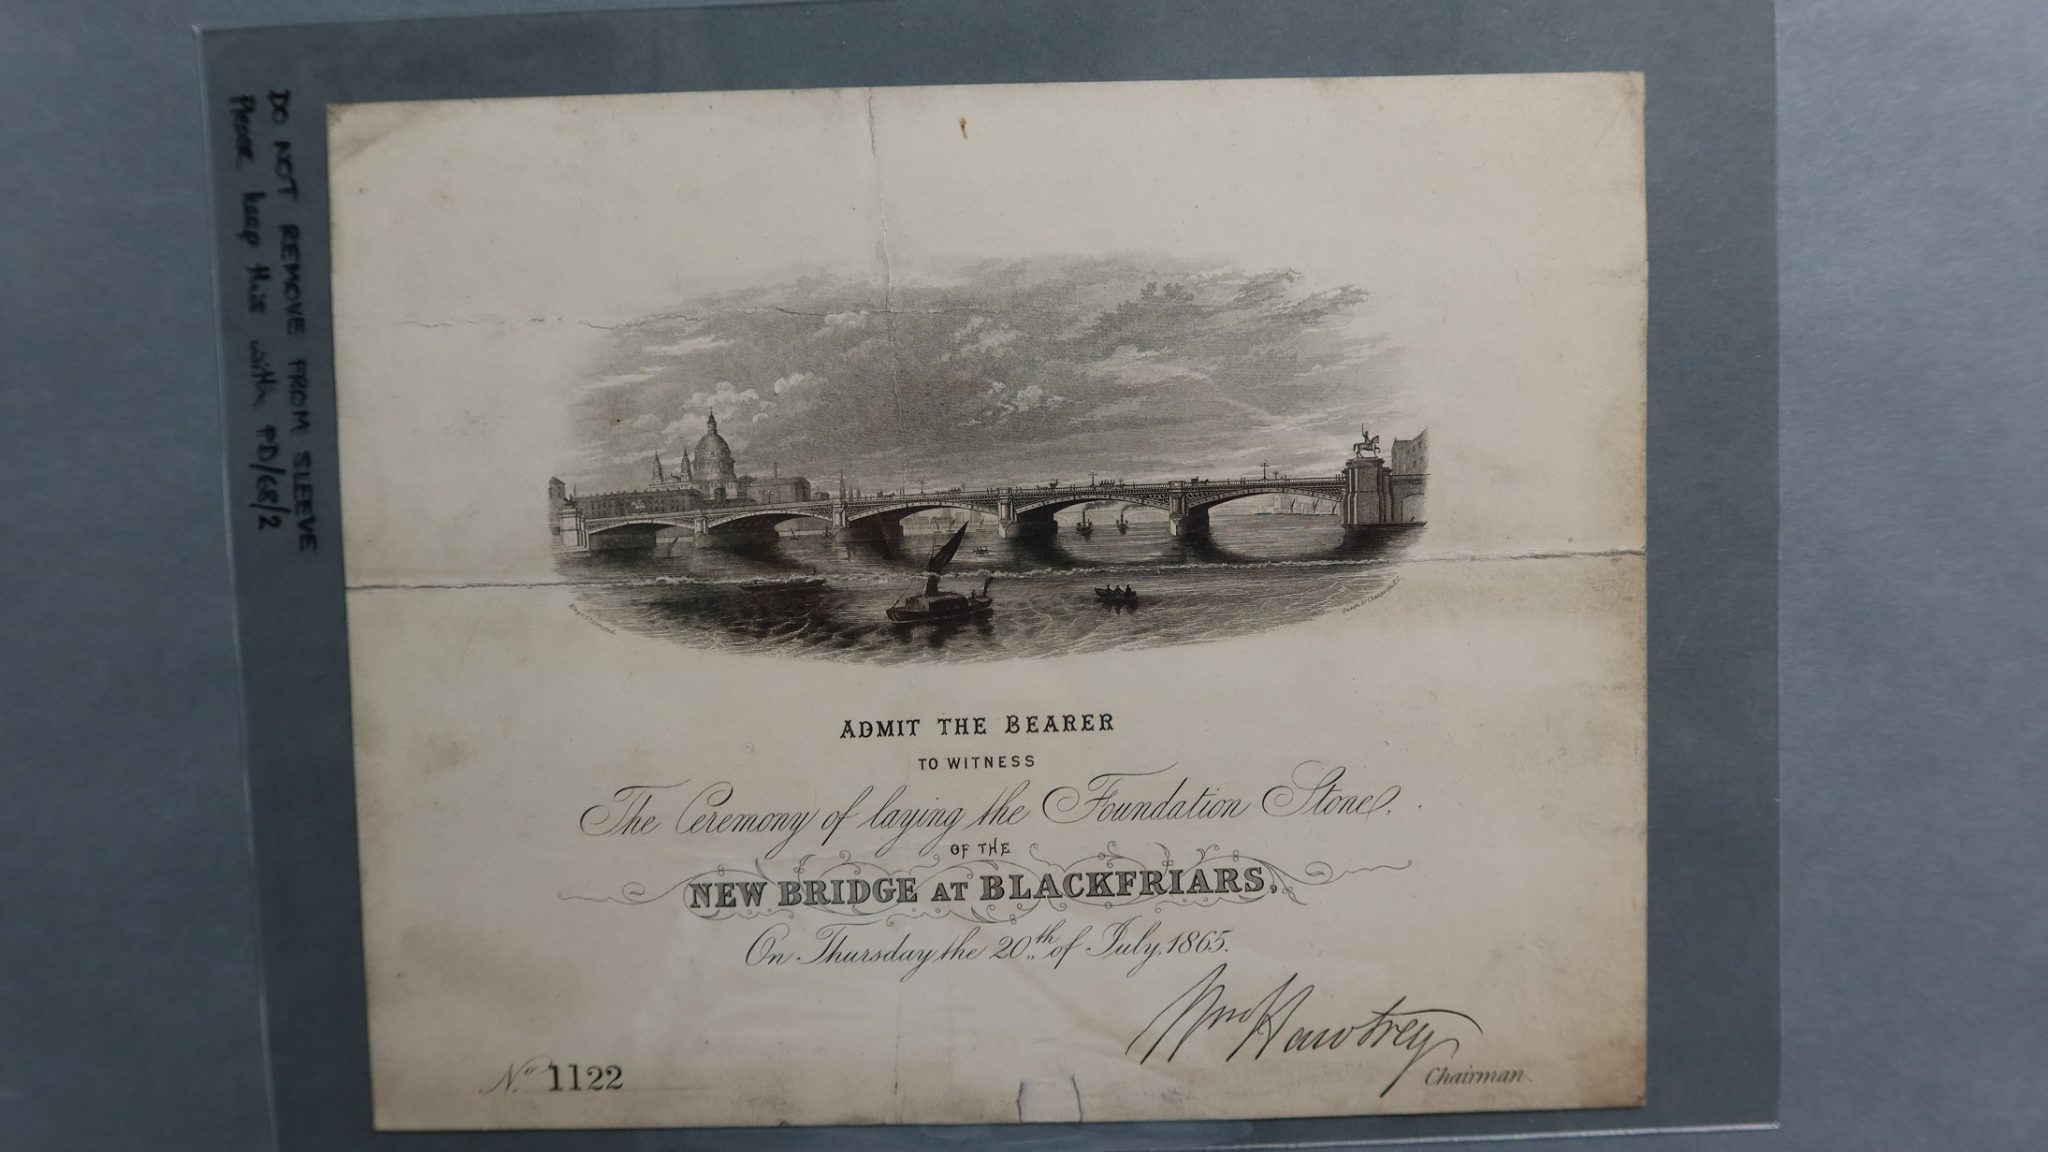 Invitation to a ceremony marking the laying of the foundation stone for the new Blackfriars Bridge on July 20, 1865